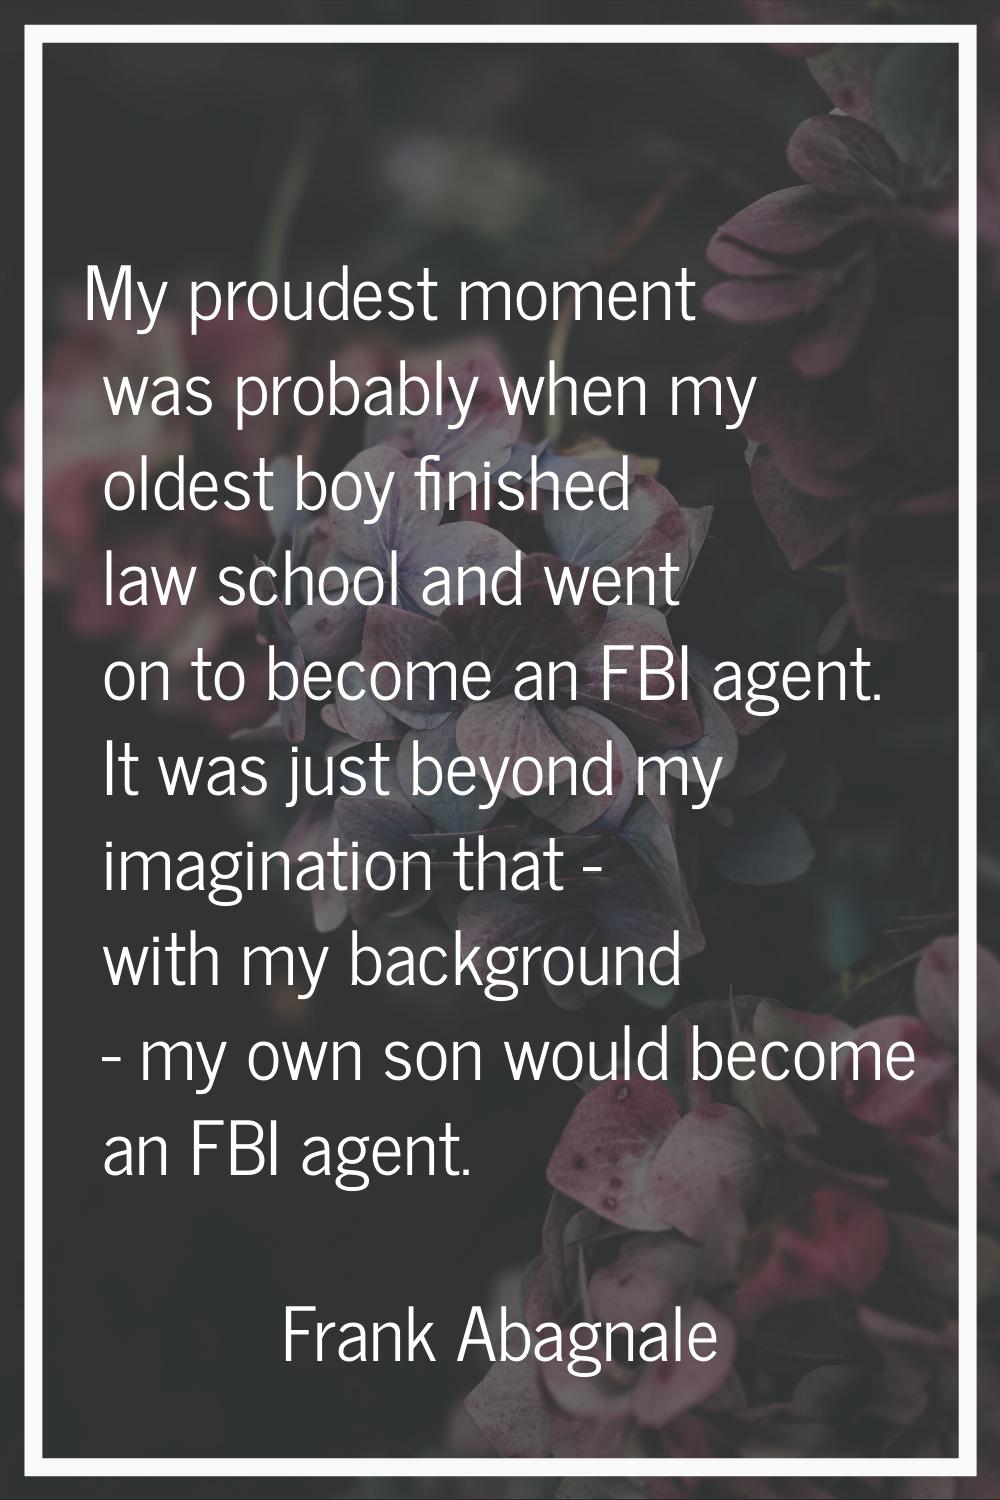 My proudest moment was probably when my oldest boy finished law school and went on to become an FBI